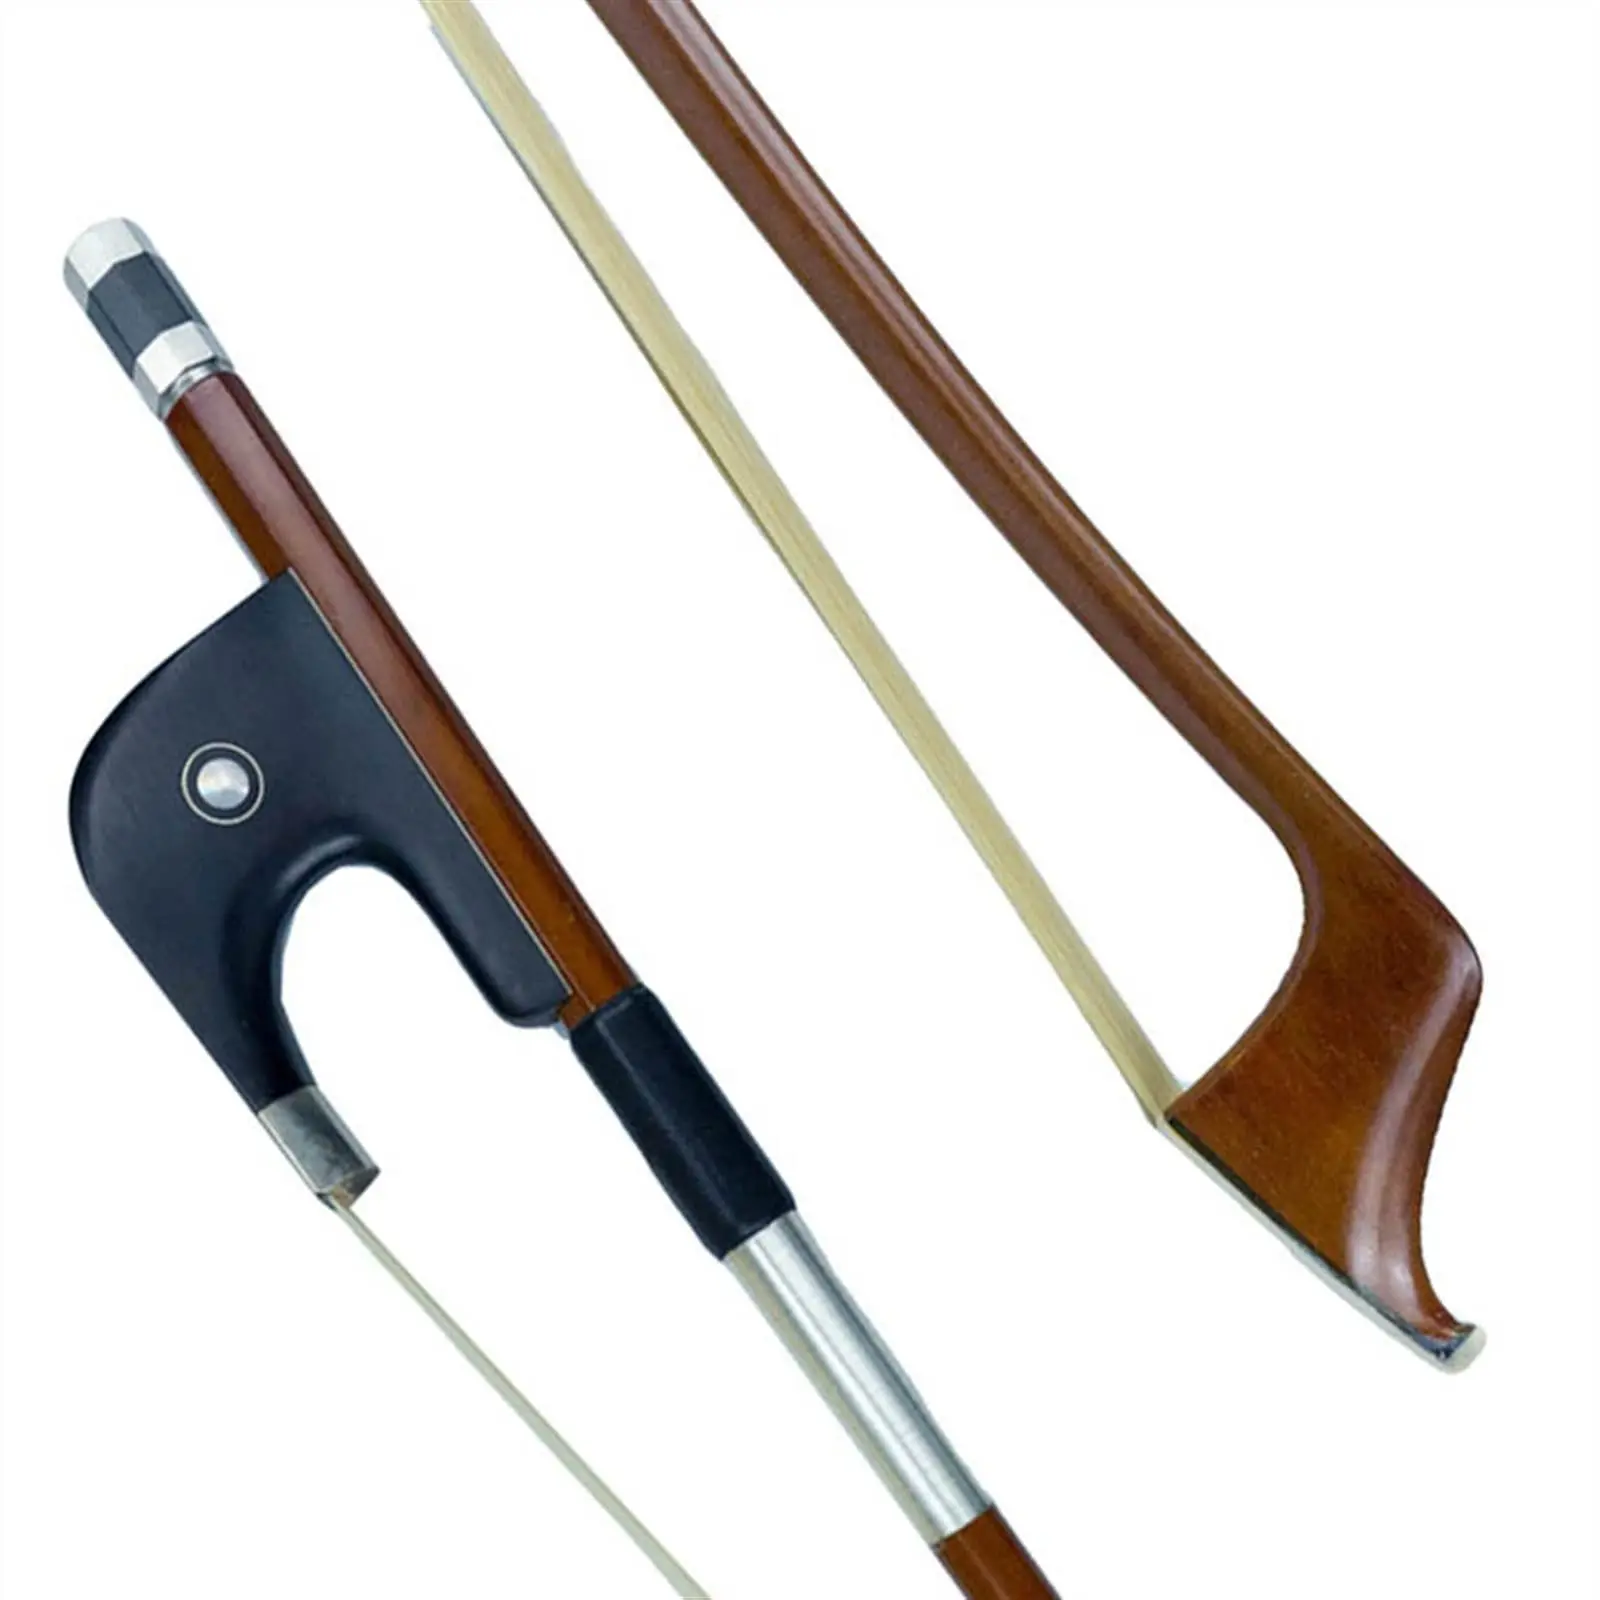 base violin bow - What is the bottom of a violin bow called